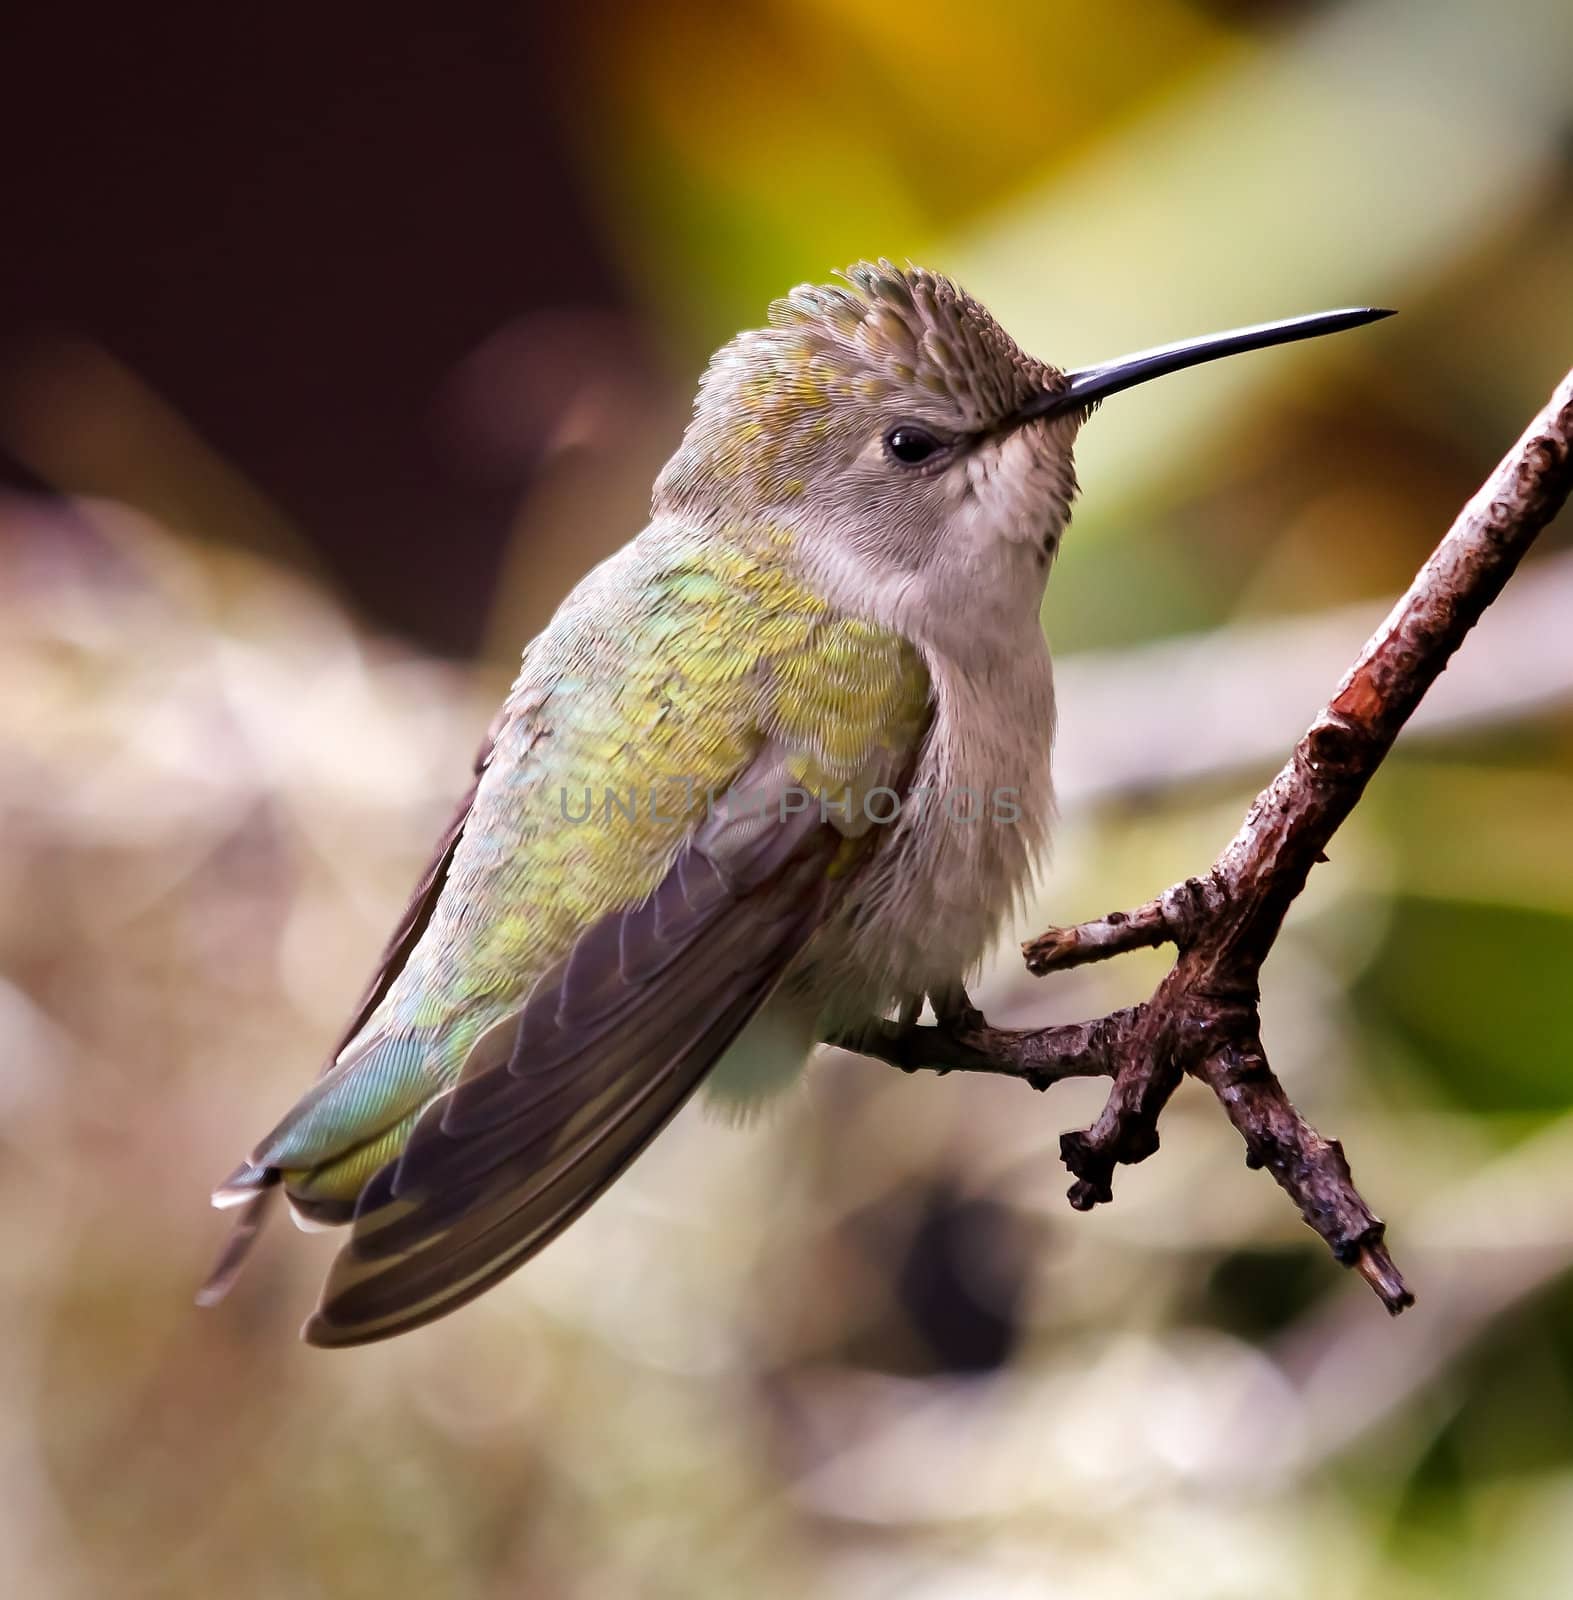 Anna's Hummingbird, calpyte anna, female, feed on nectar and live in North America, Feathers